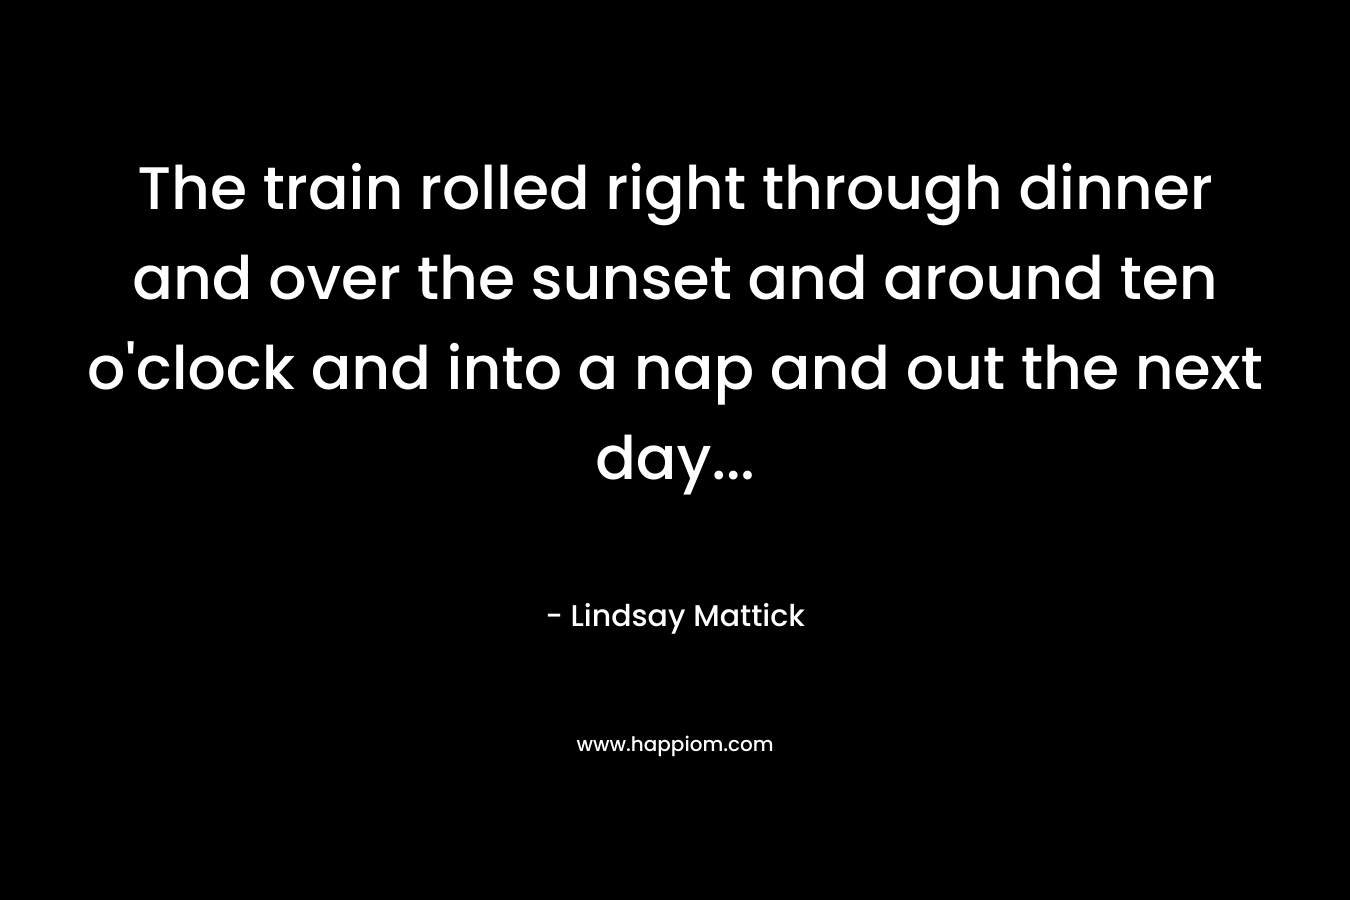 The train rolled right through dinner and over the sunset and around ten o’clock and into a nap and out the next day… – Lindsay Mattick